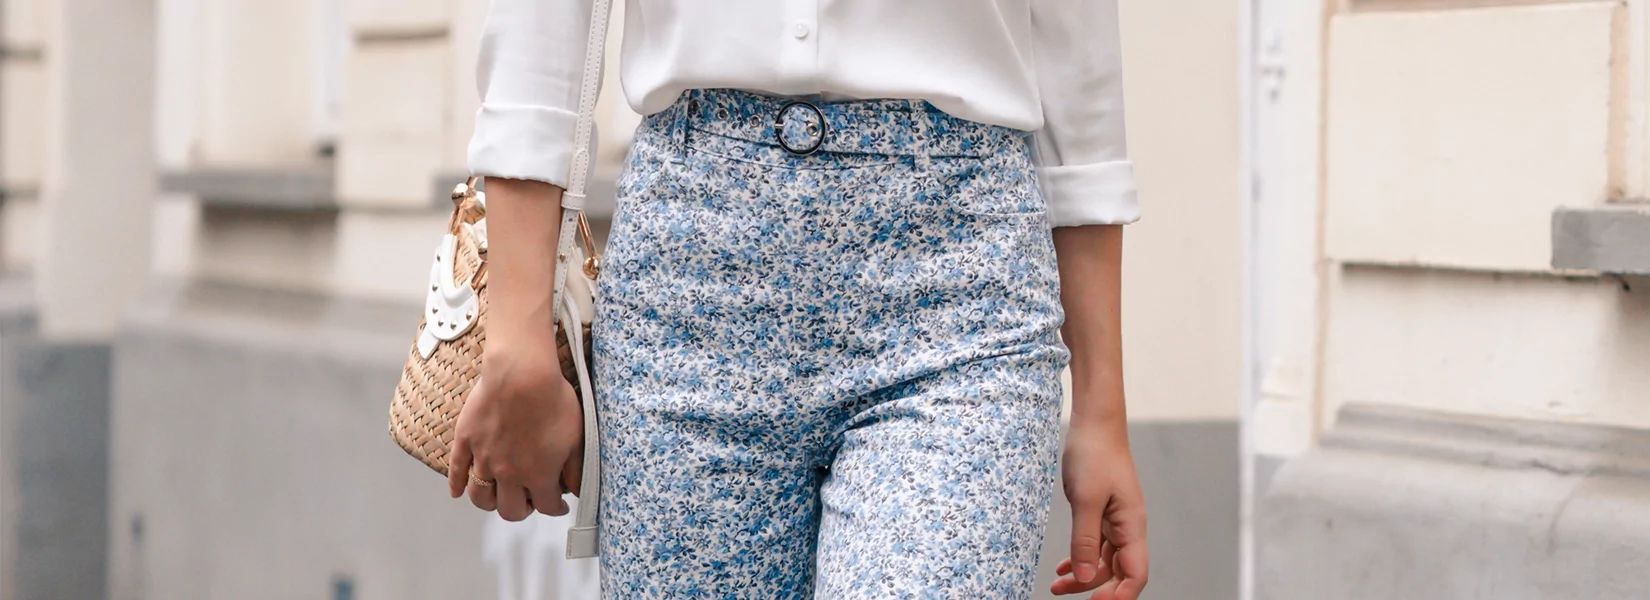 Flared Jeans: How to wear the fashion trend in spring and summer 2022